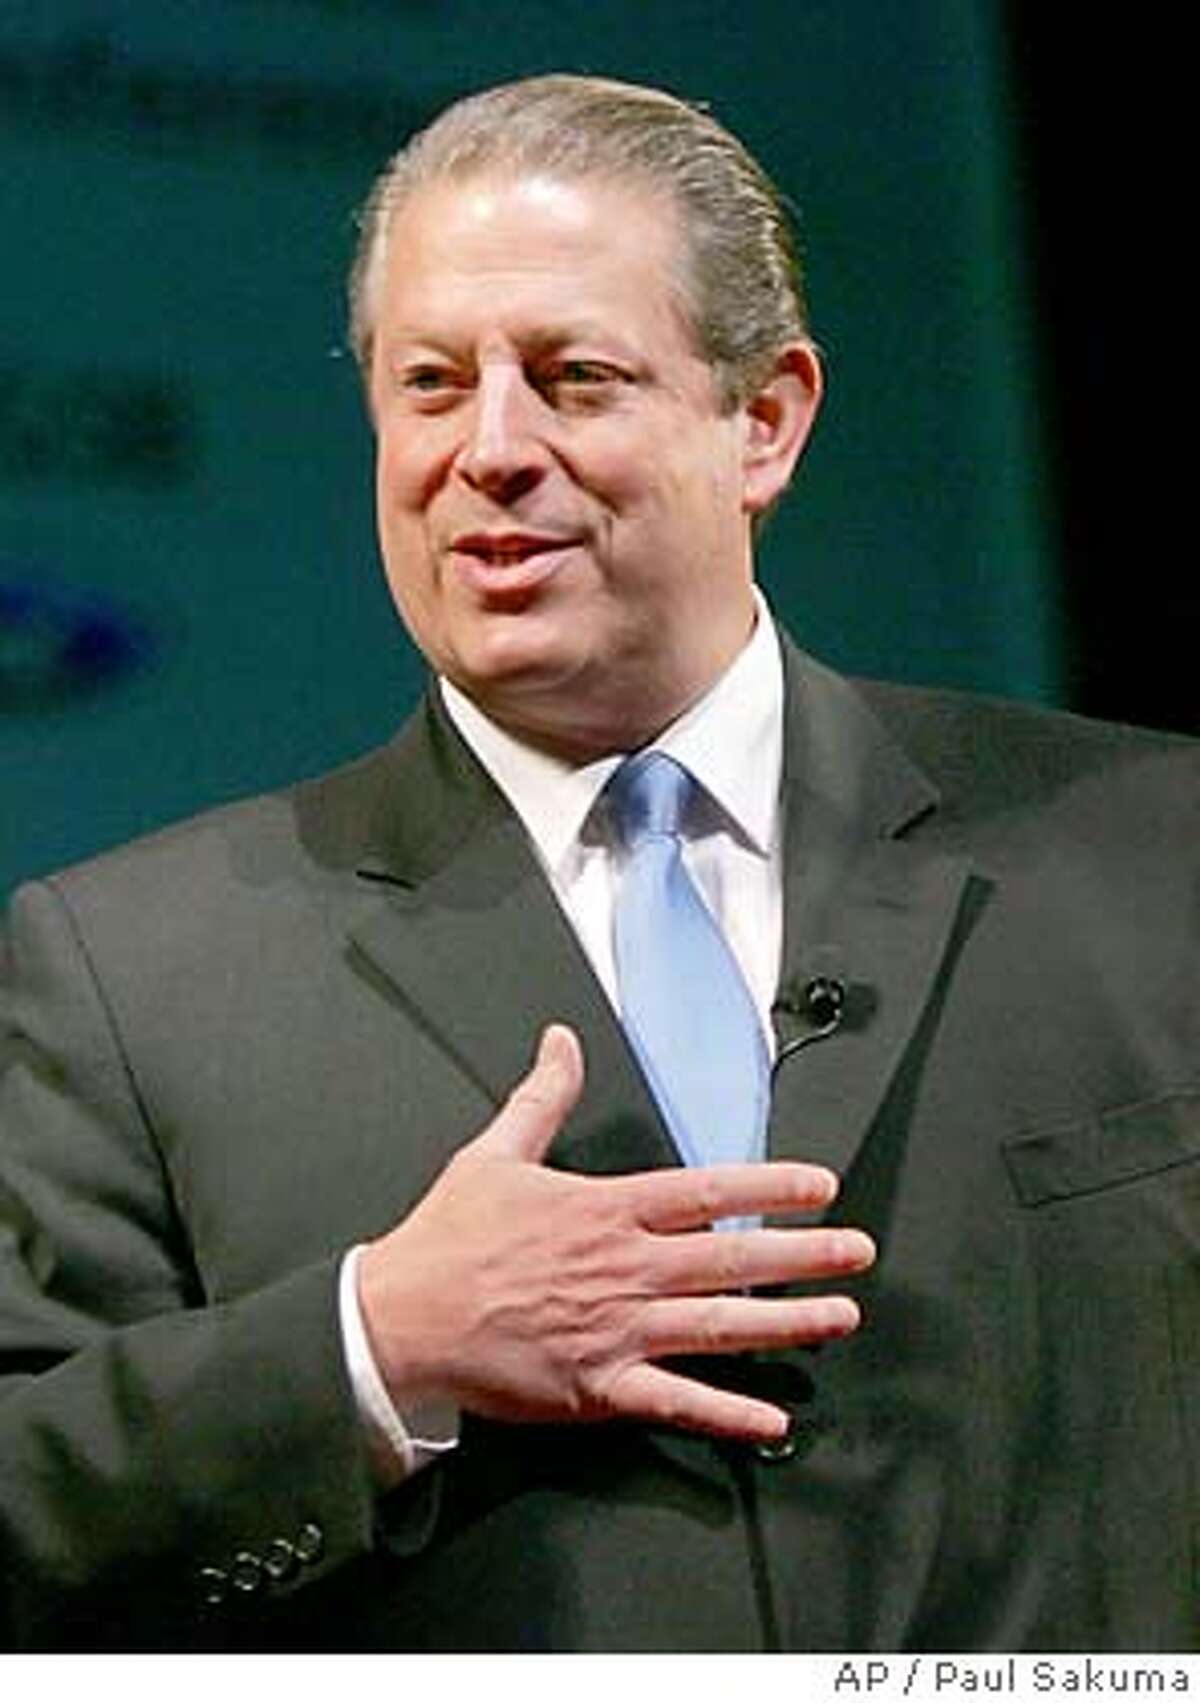 Former Vice President Al Gore gestures during a keynote address to the Net Impact 2005 Conference at Stanford University in Stanford, Calif., Friday, Nov. 11, 2005. Gore is presently chairman of Generation Investment Management. Net Impact 2005 Conference is one of the largest annual gatherings of MBA students in the world. (AP Photo/Paul Sakuma) Ran on: 11-12-2005 Photo caption STAND ALONE PHOTO